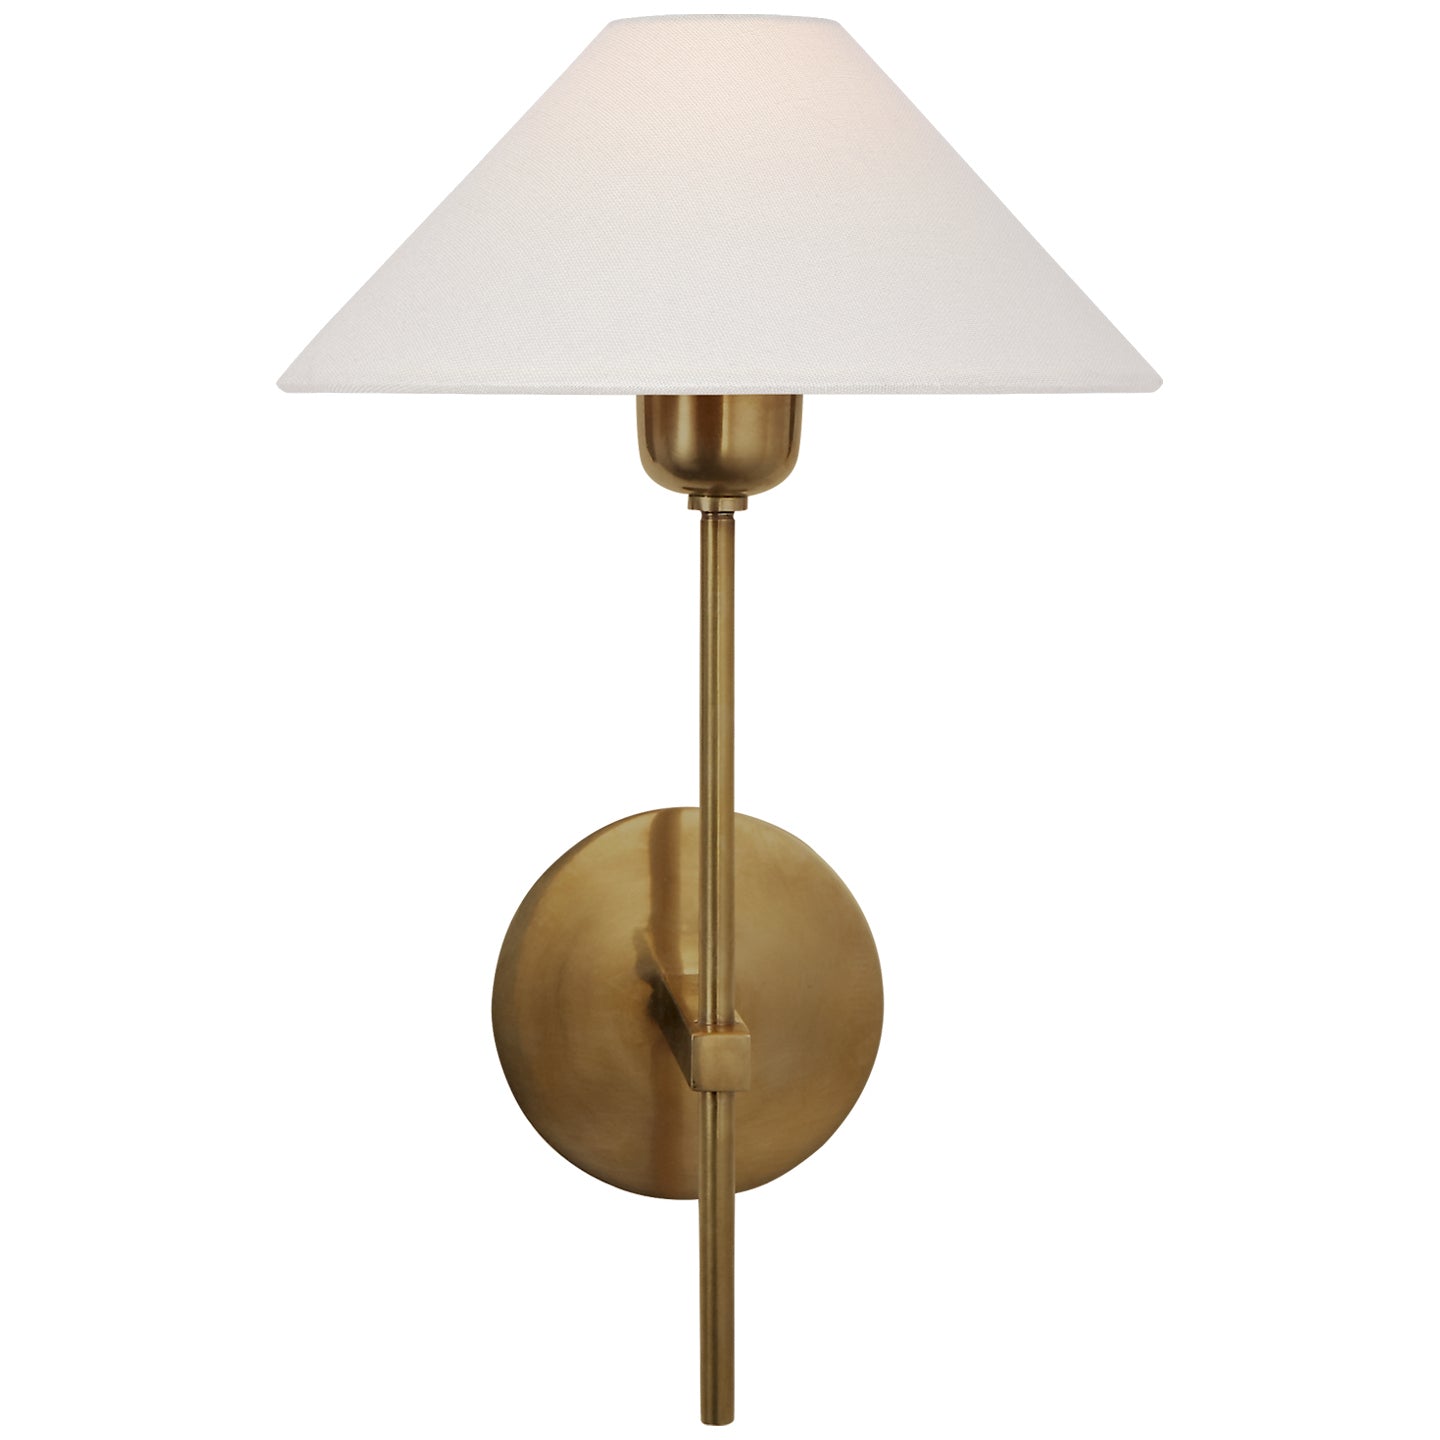 Visual Comfort Signature - SP 2022HAB-L - One Light Wall Sconce - Hackney - Hand-Rubbed Antique Brass